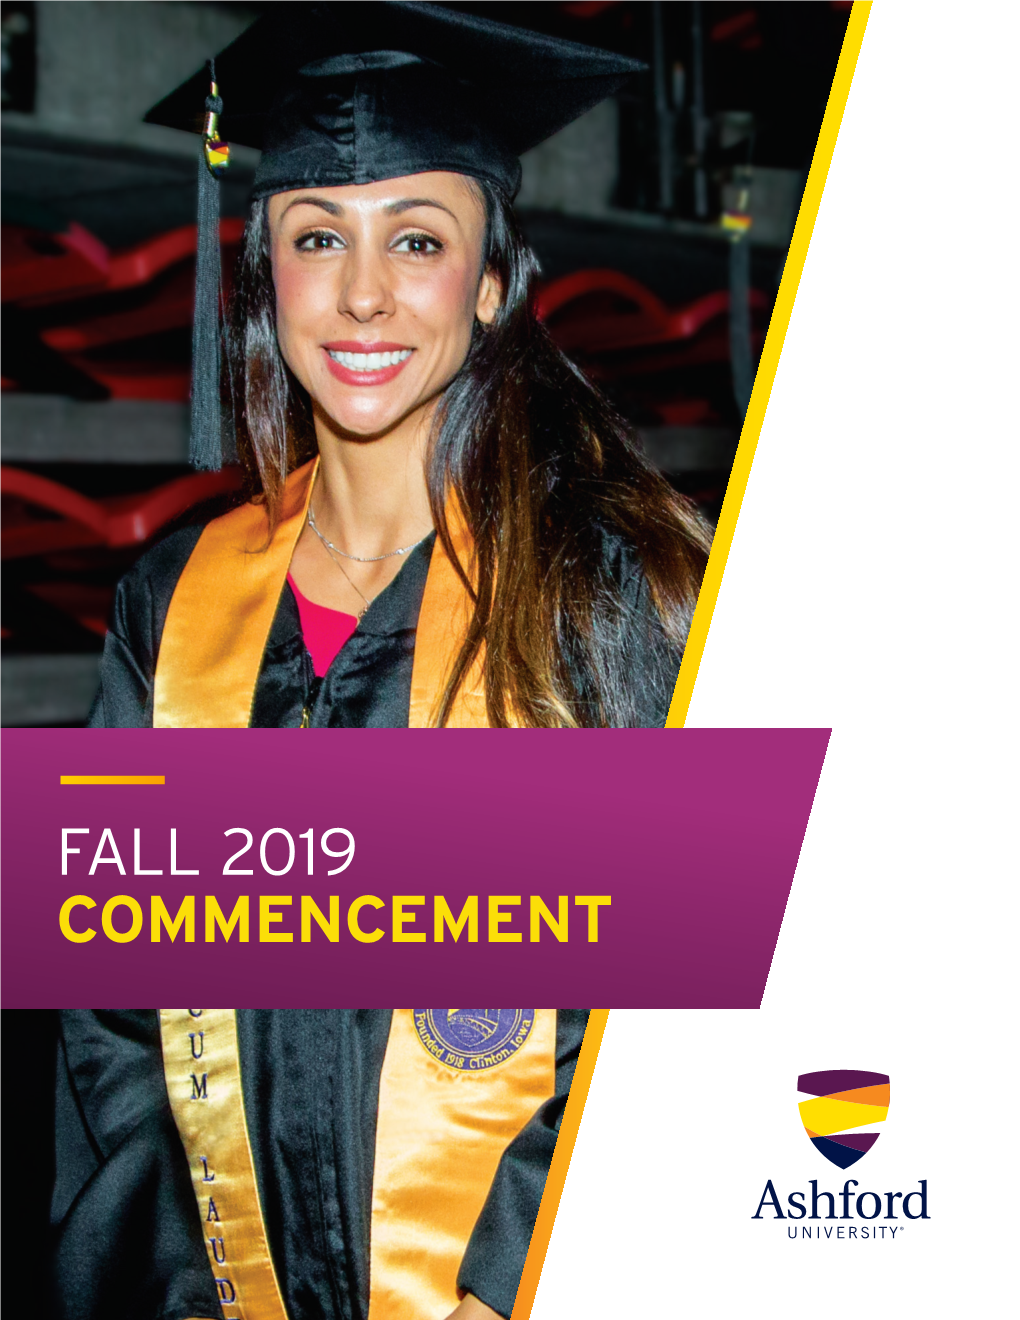 FALL 2019 COMMENCEMENT Commencement